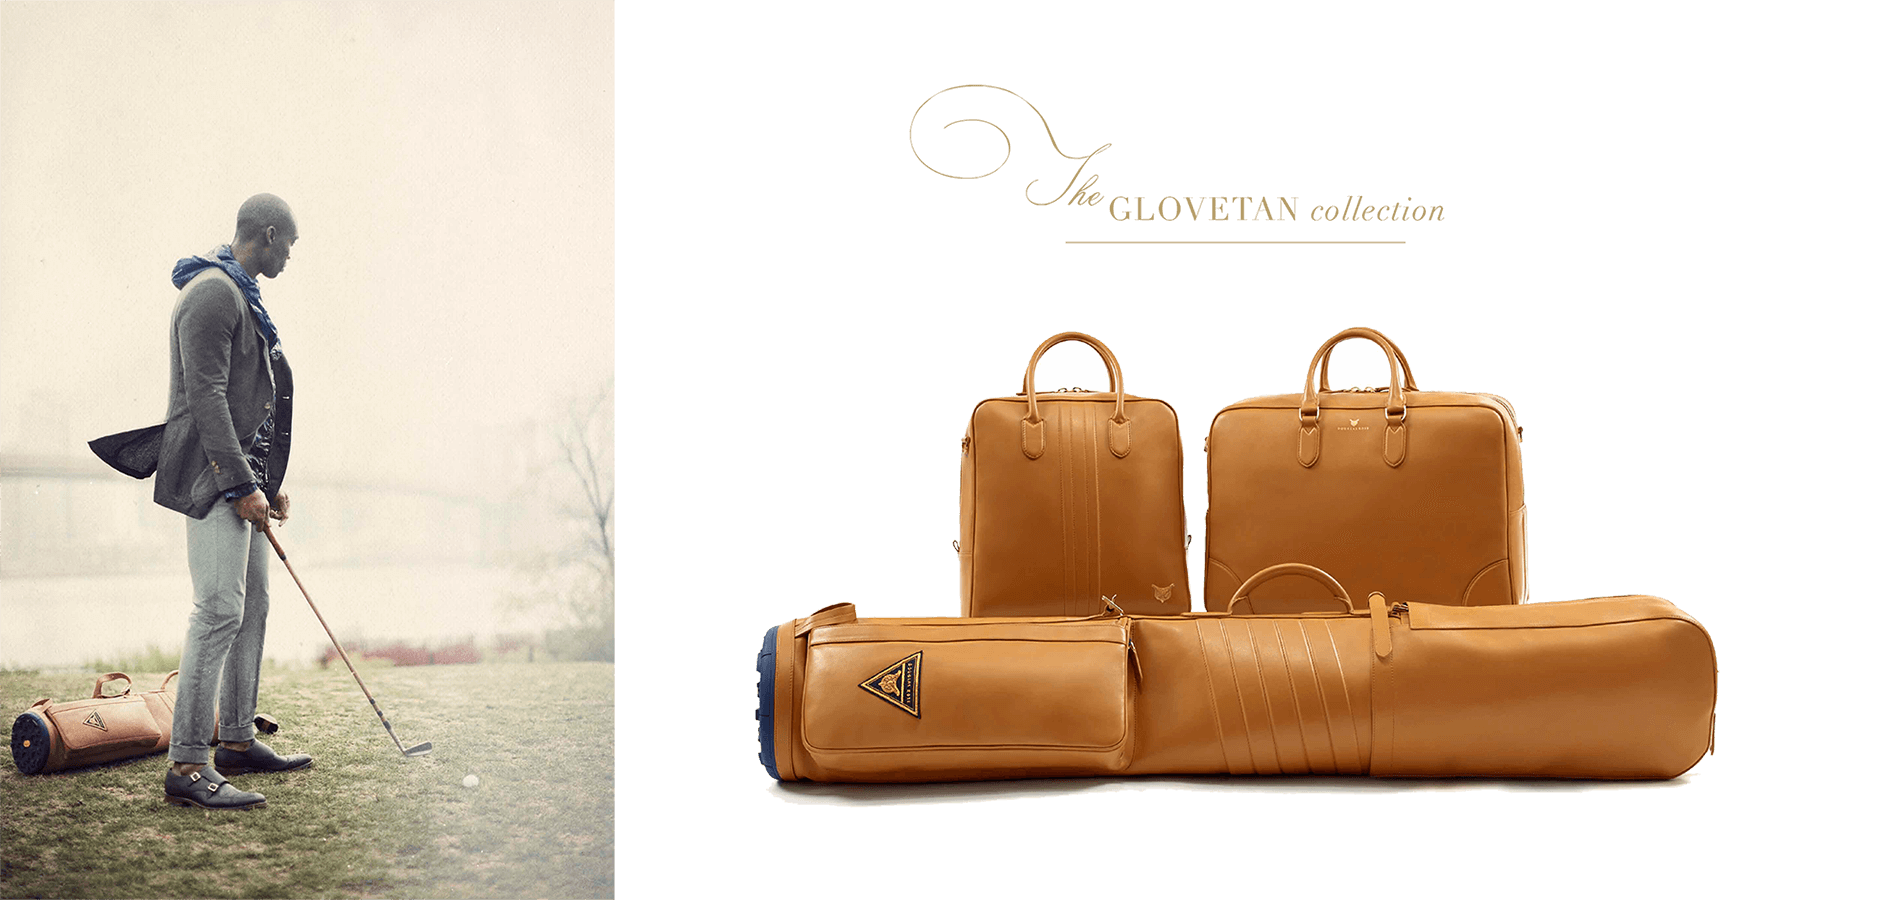 glovetan collection leather bags and luggage